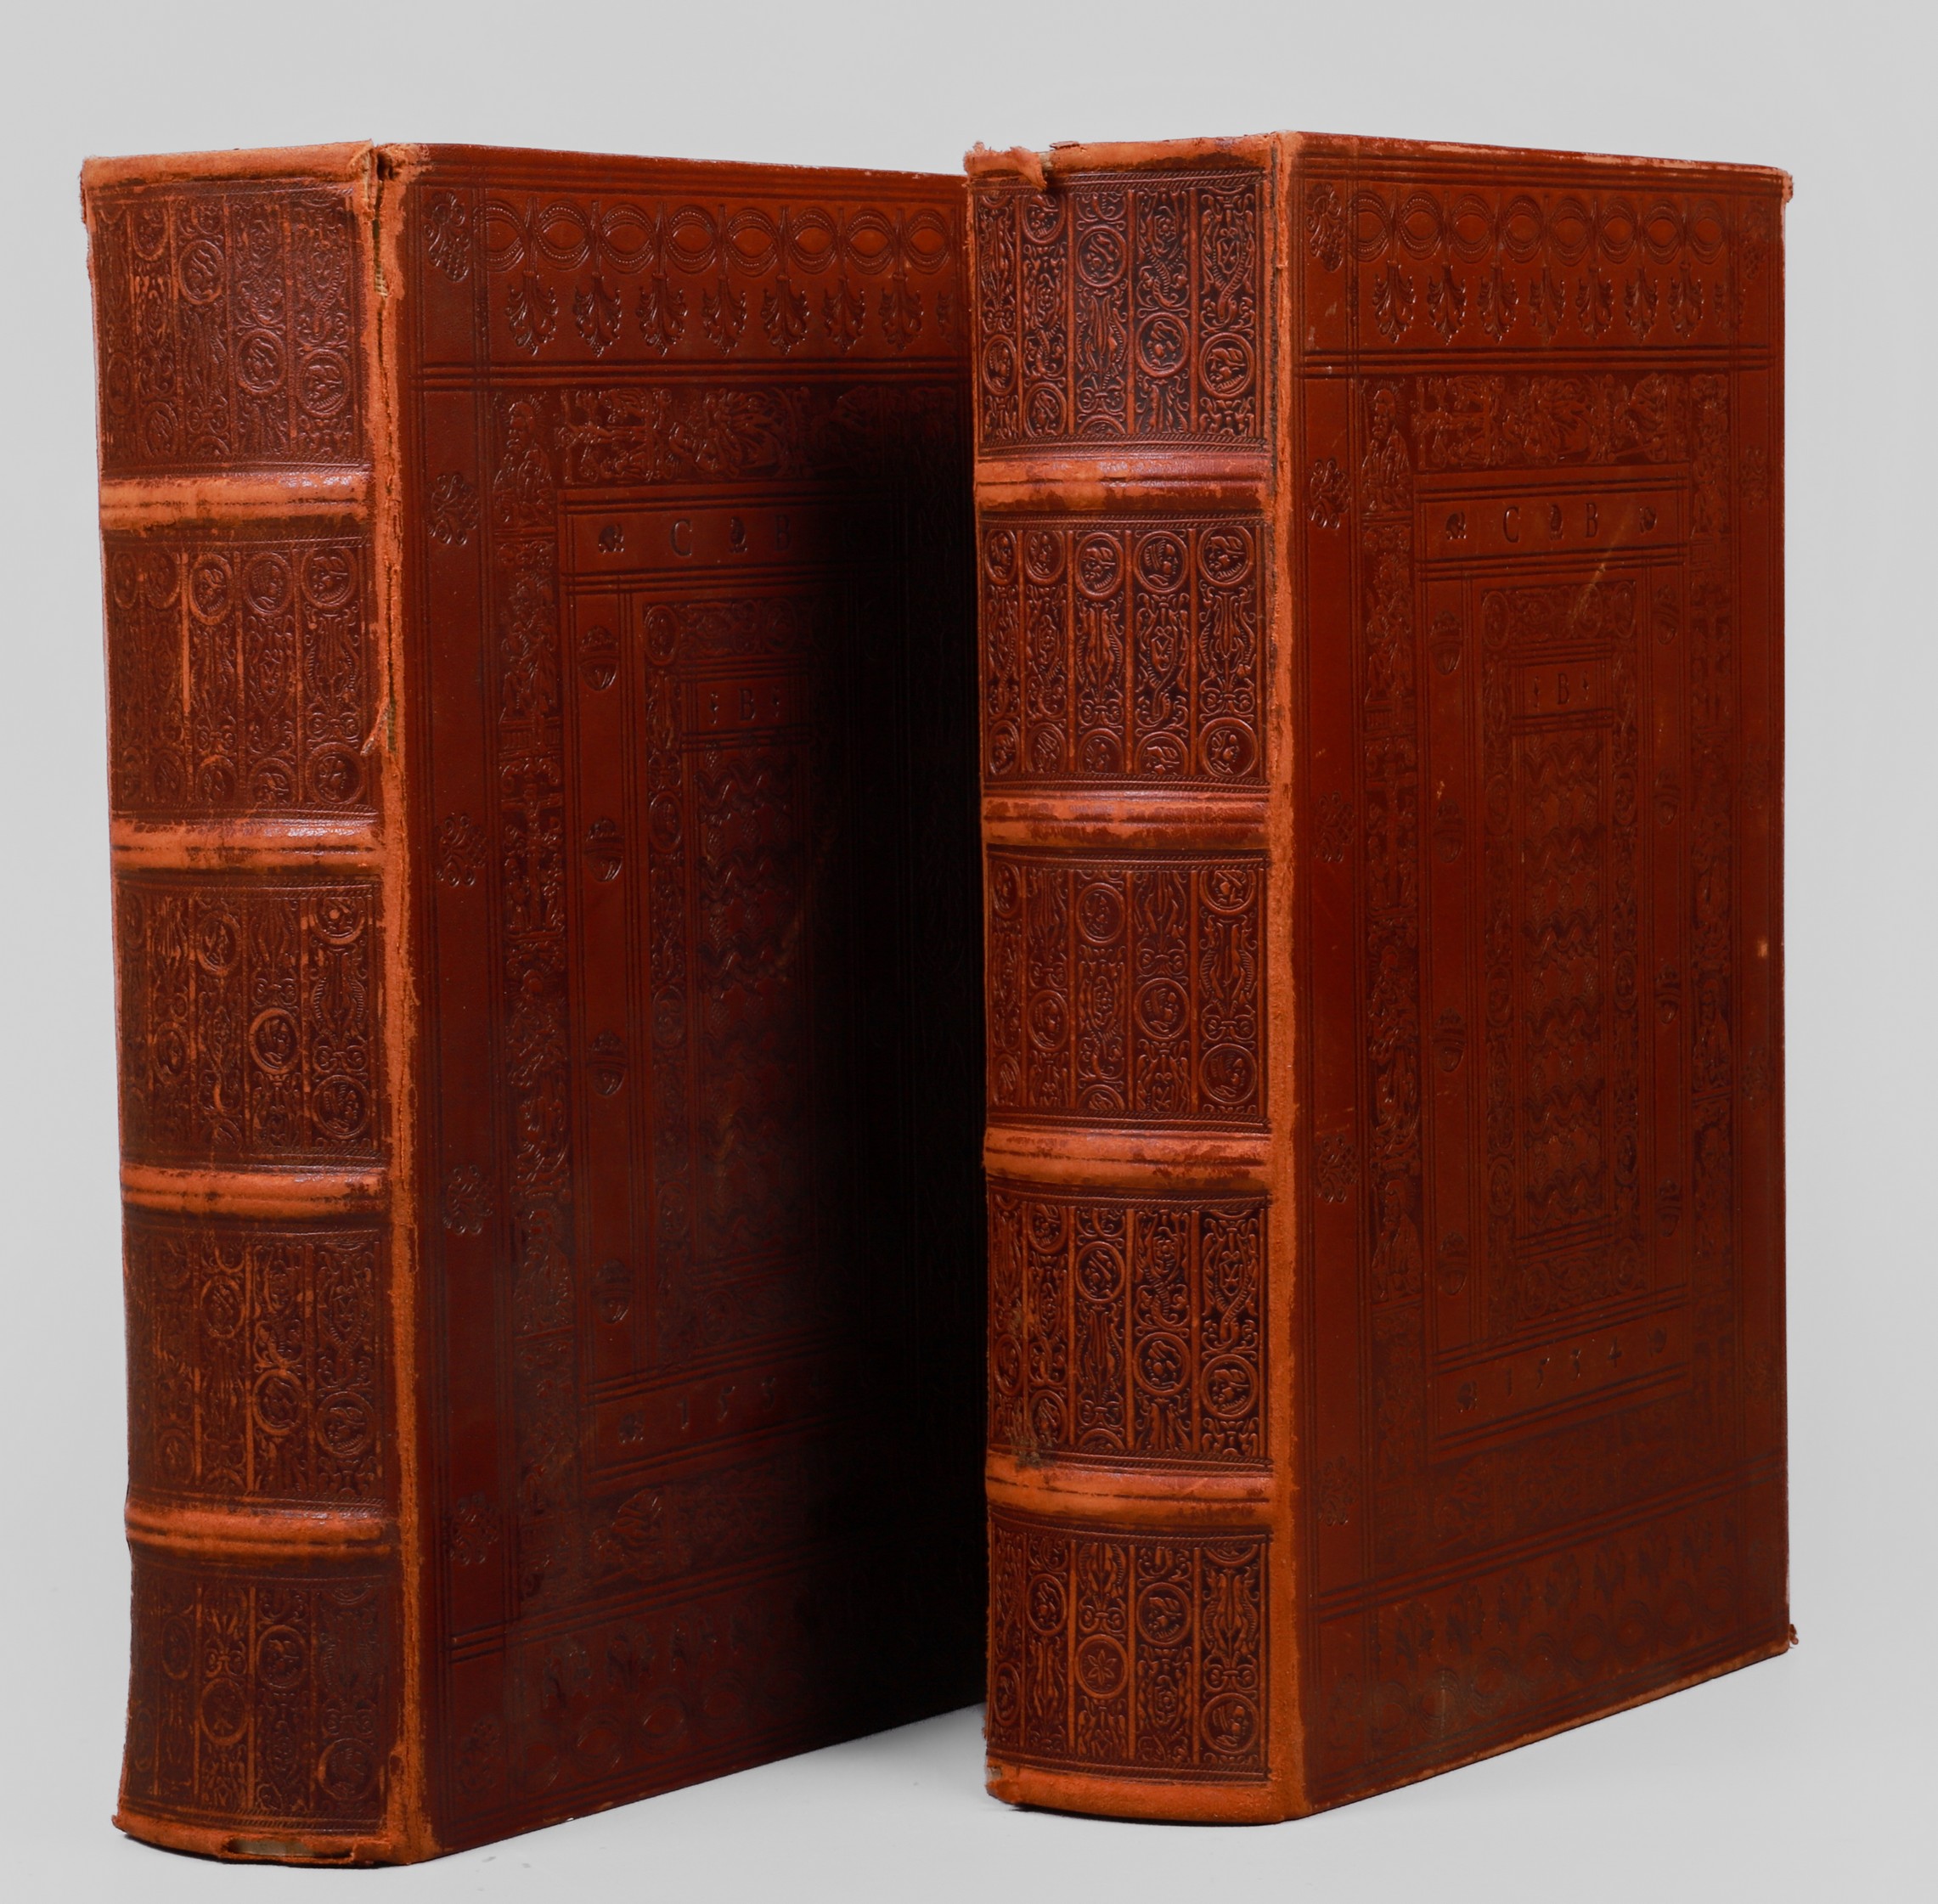 A two-volume reproduction of 1534 copies